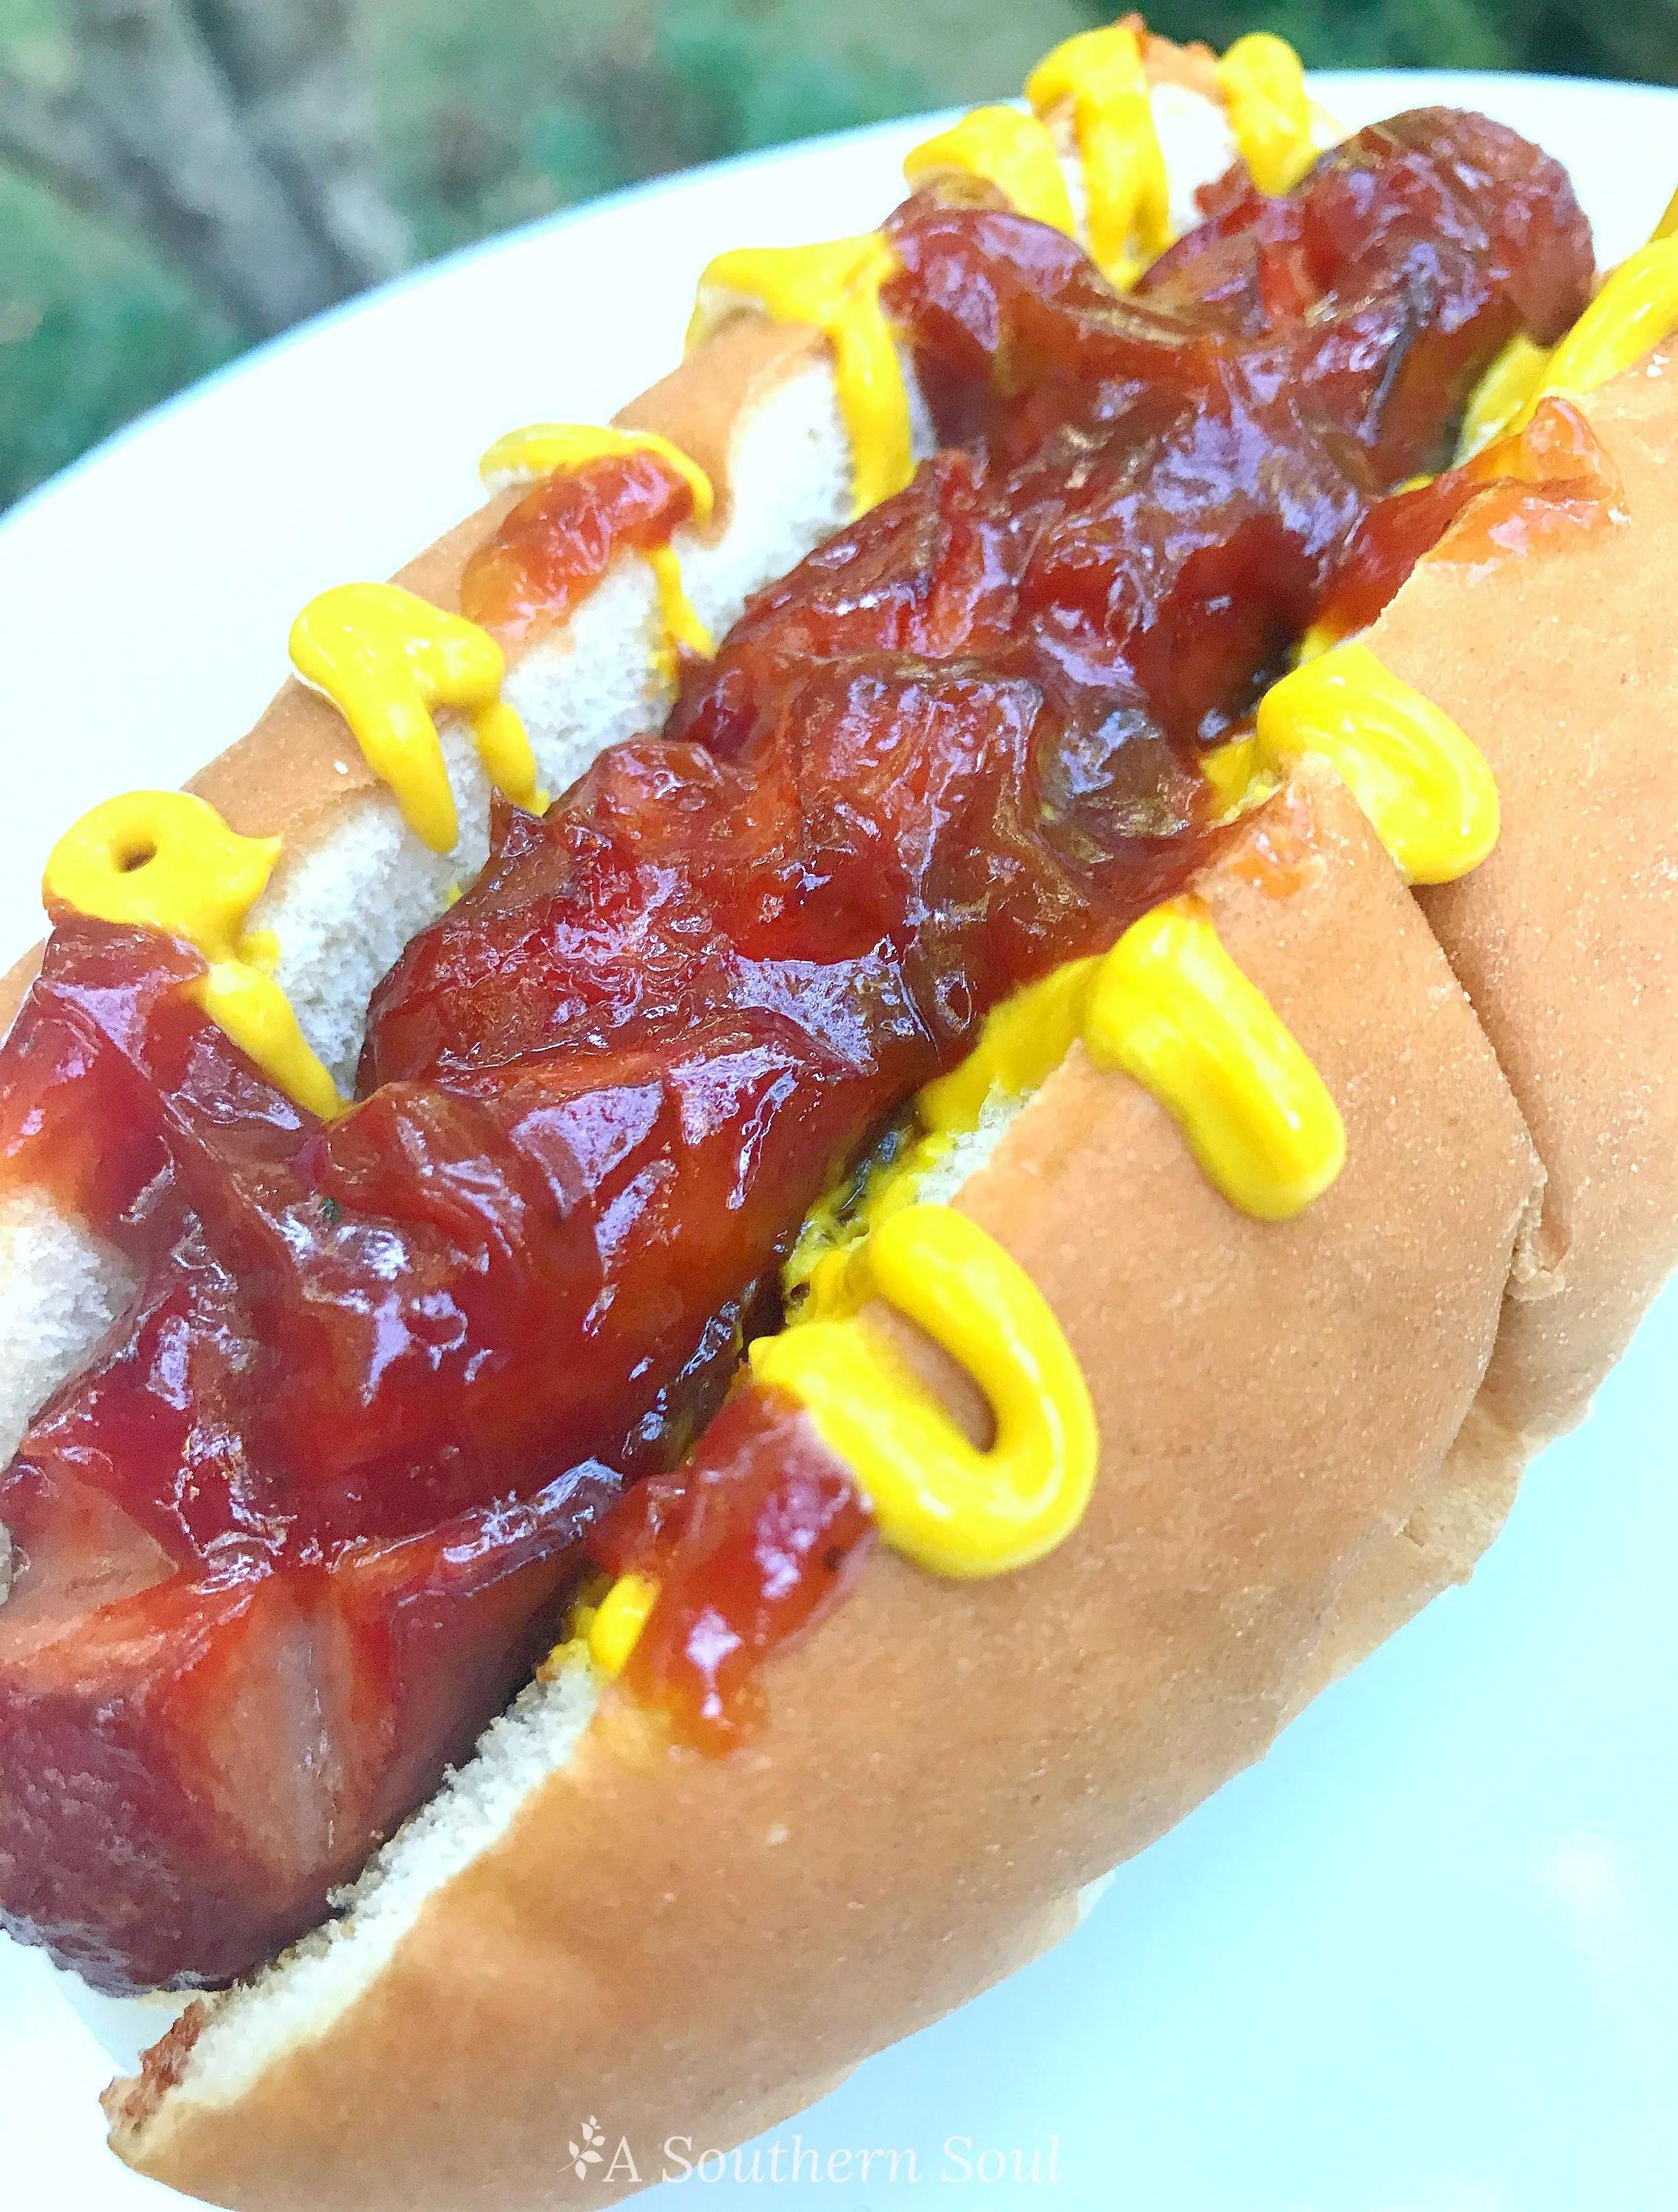 Grilled Barbecued Hot Dogs - A Southern Soul